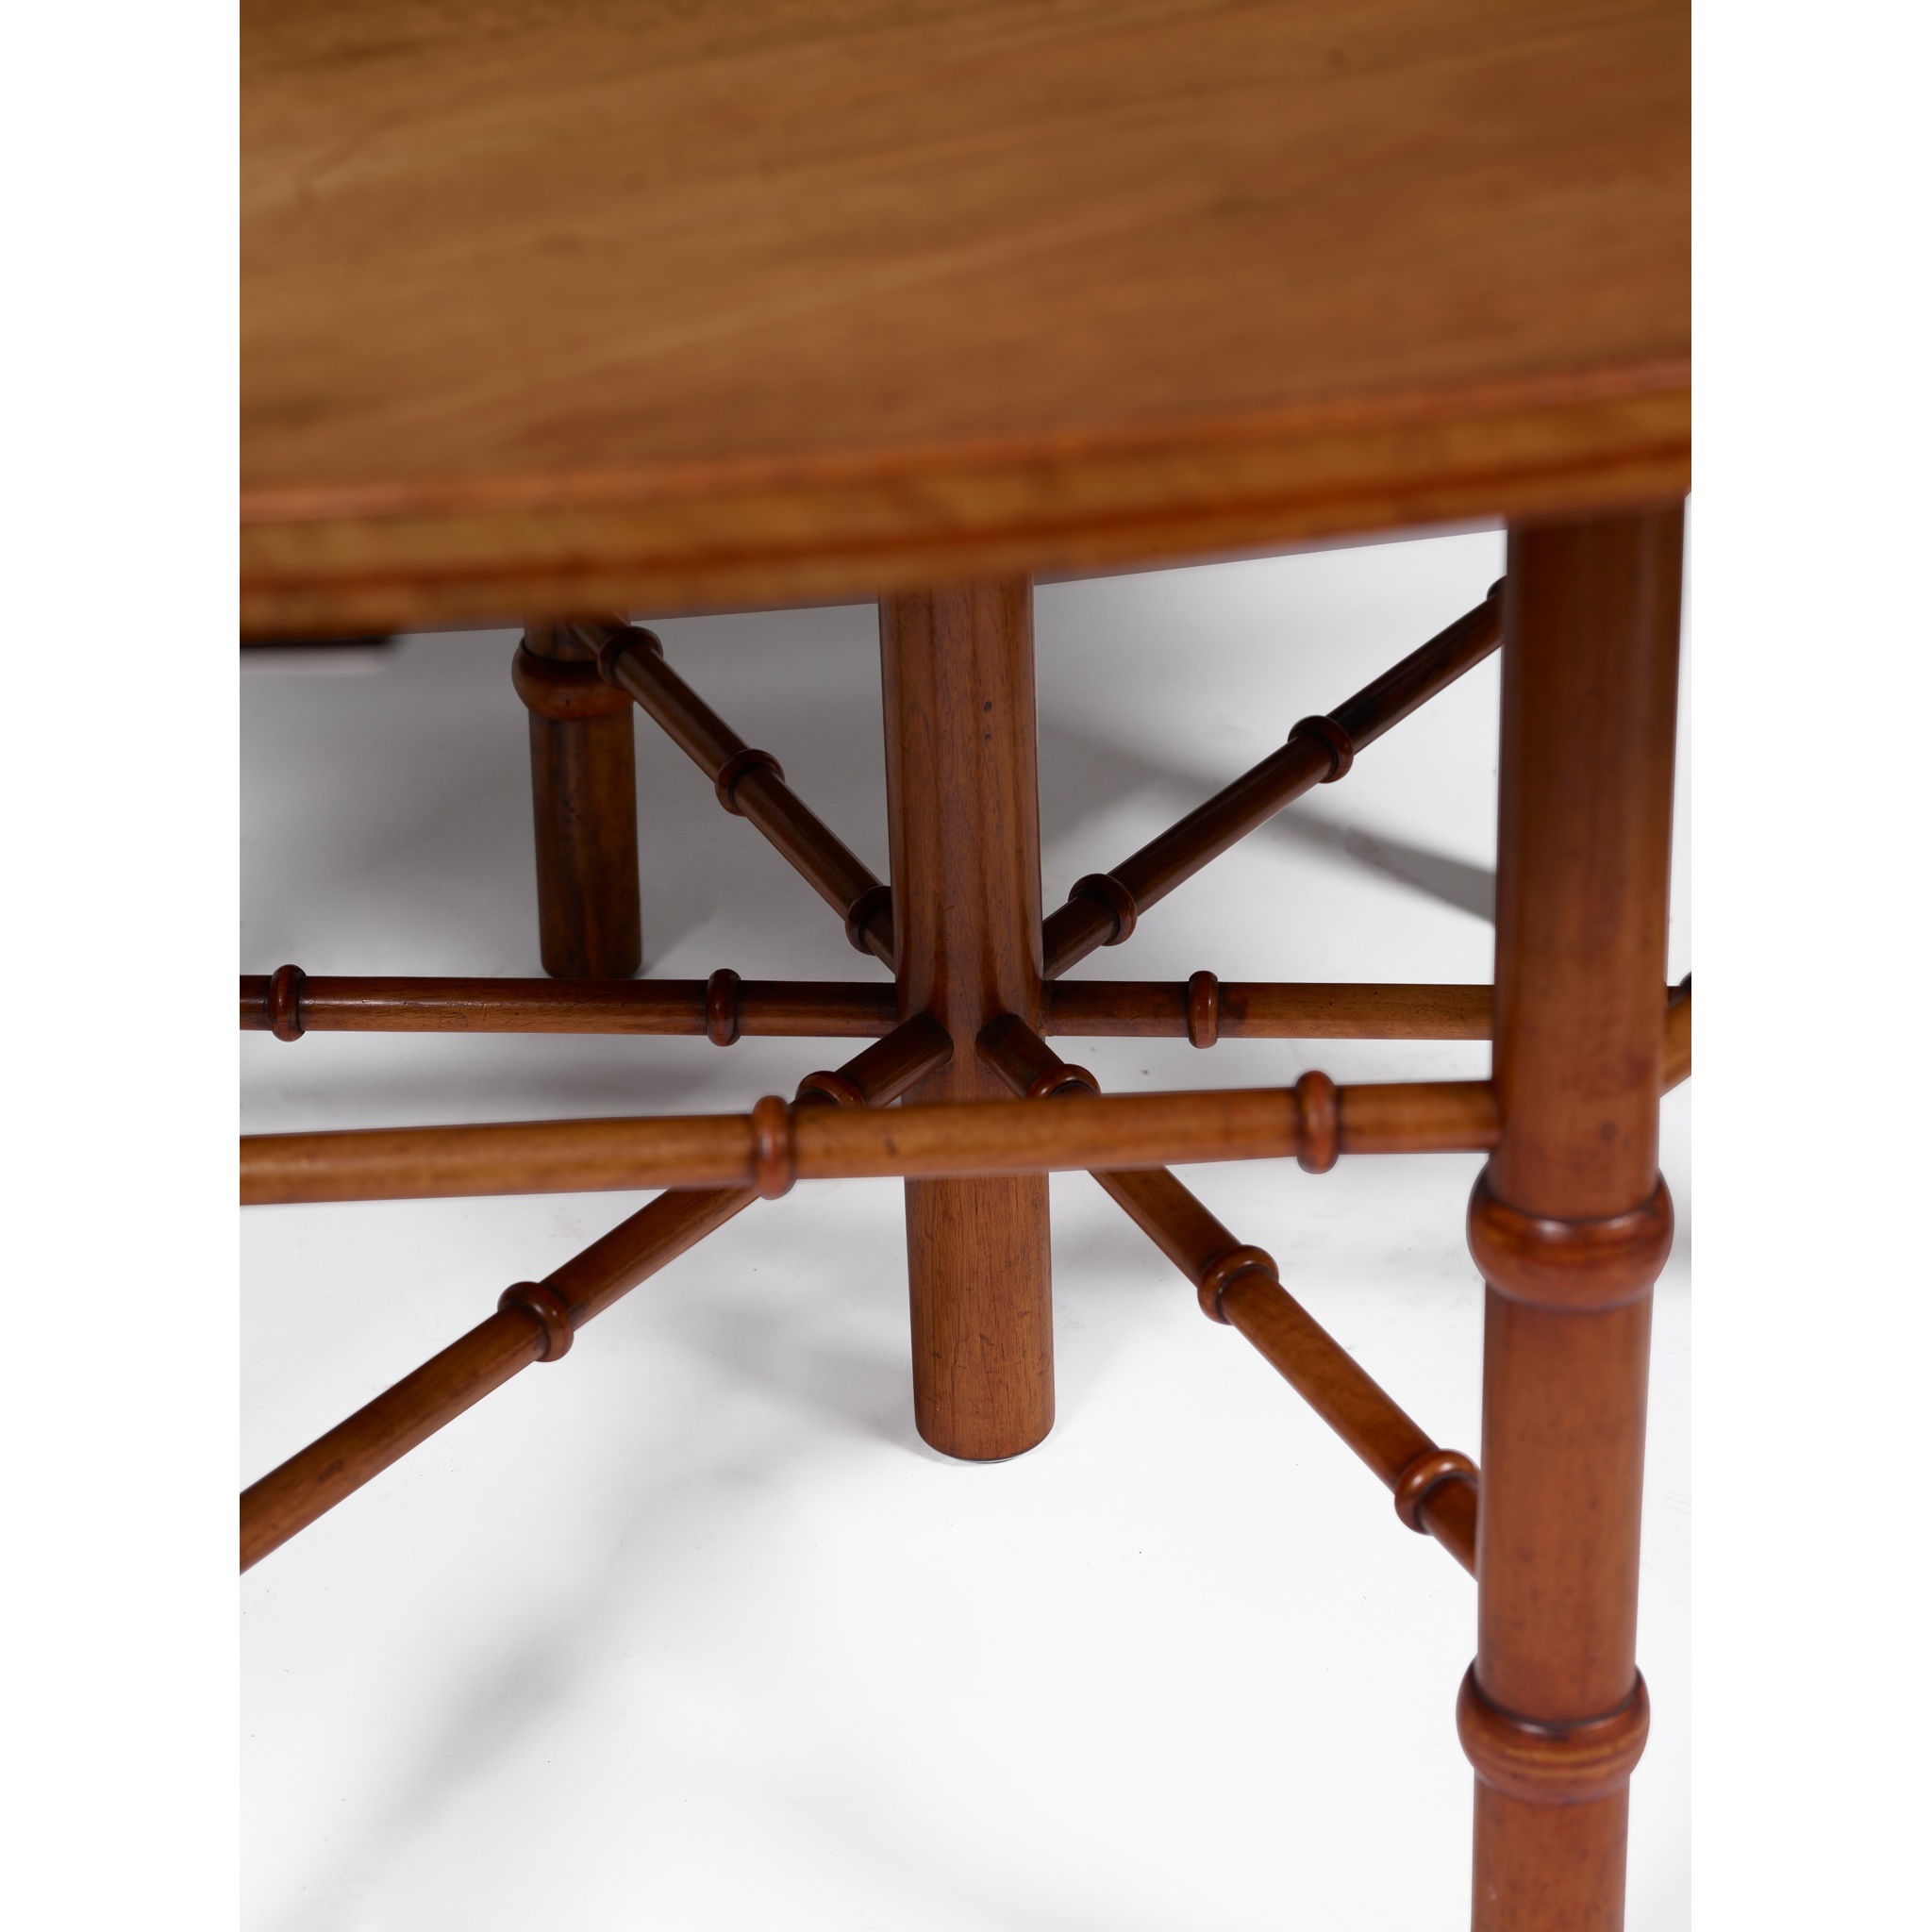 PHILIP SPEAKMAN WEBB (1831-1915) FOR MORRIS & CO. UNUSUAL OVAL CENTRE TABLE, CIRCA 1880 - Image 4 of 4